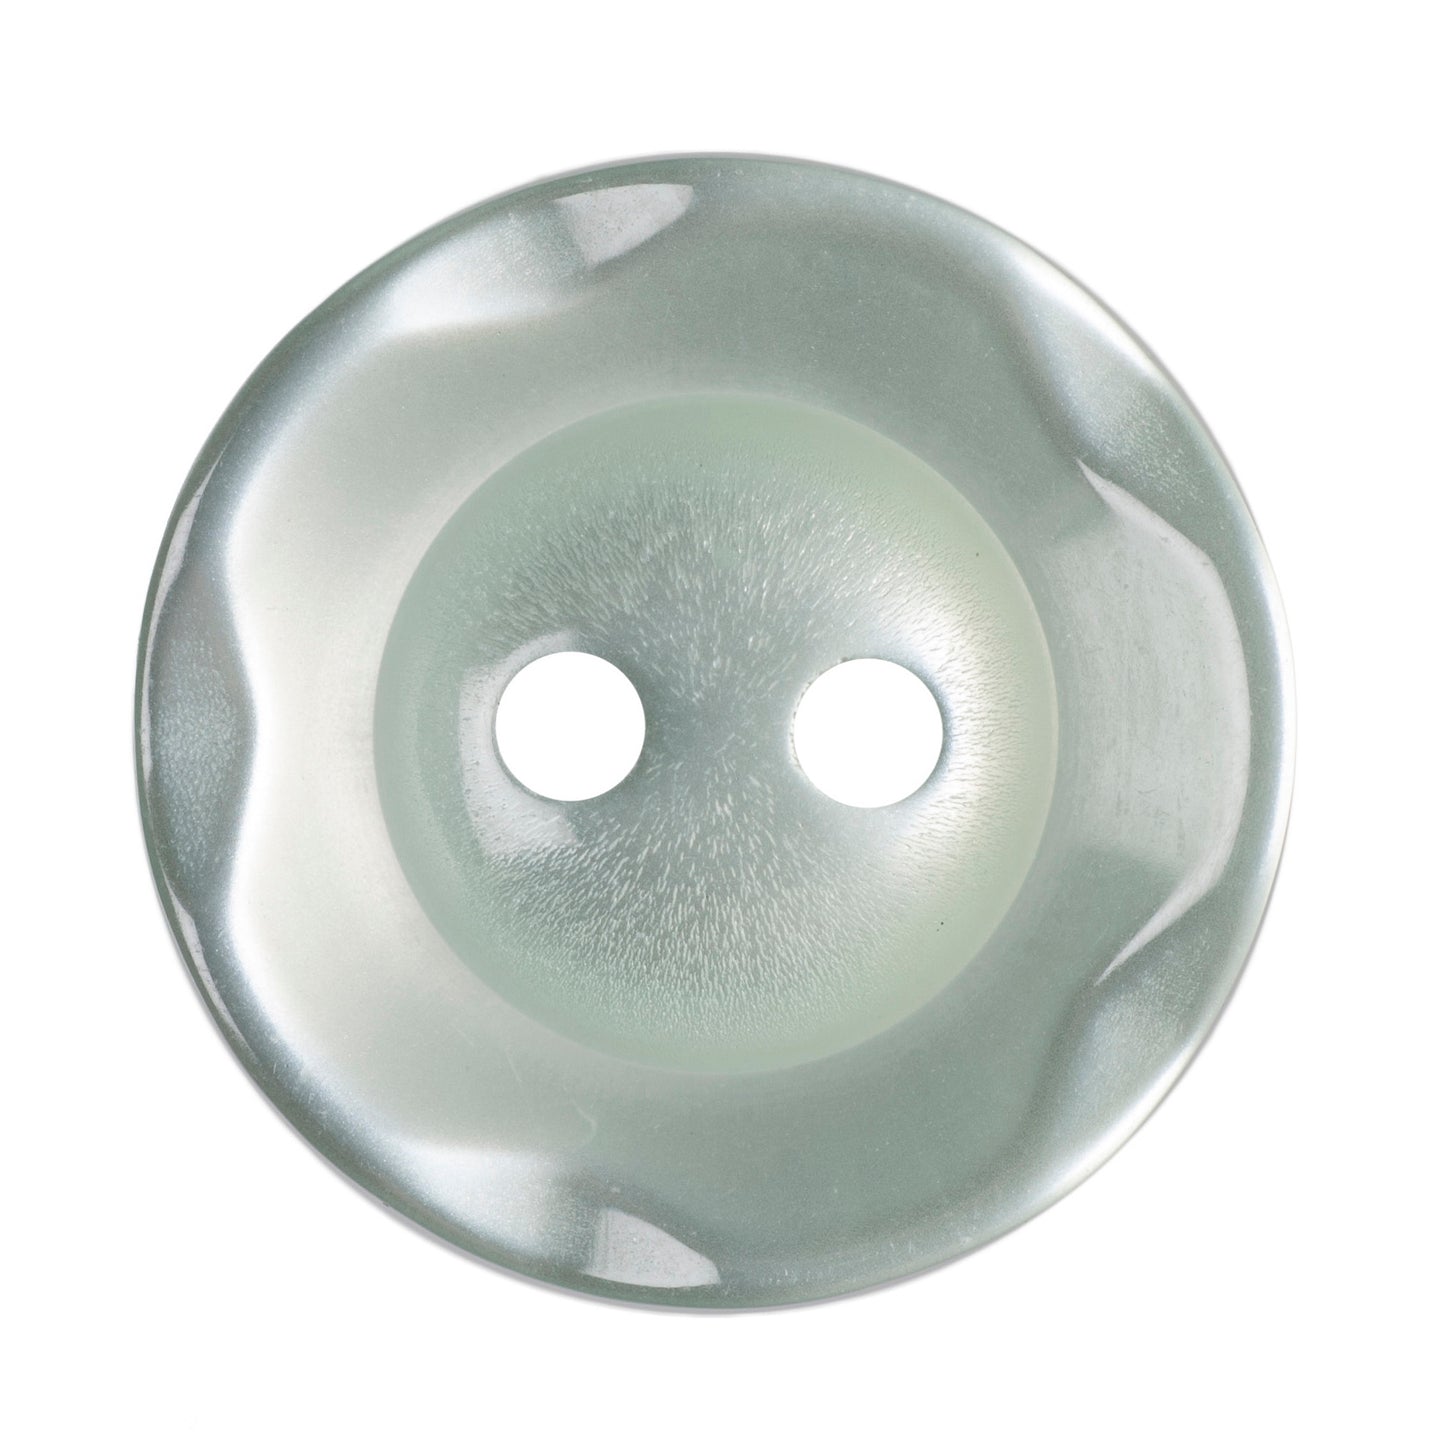 Polyester Scalloped Edge Button - 16mm - Pale Teal [LB25.2]